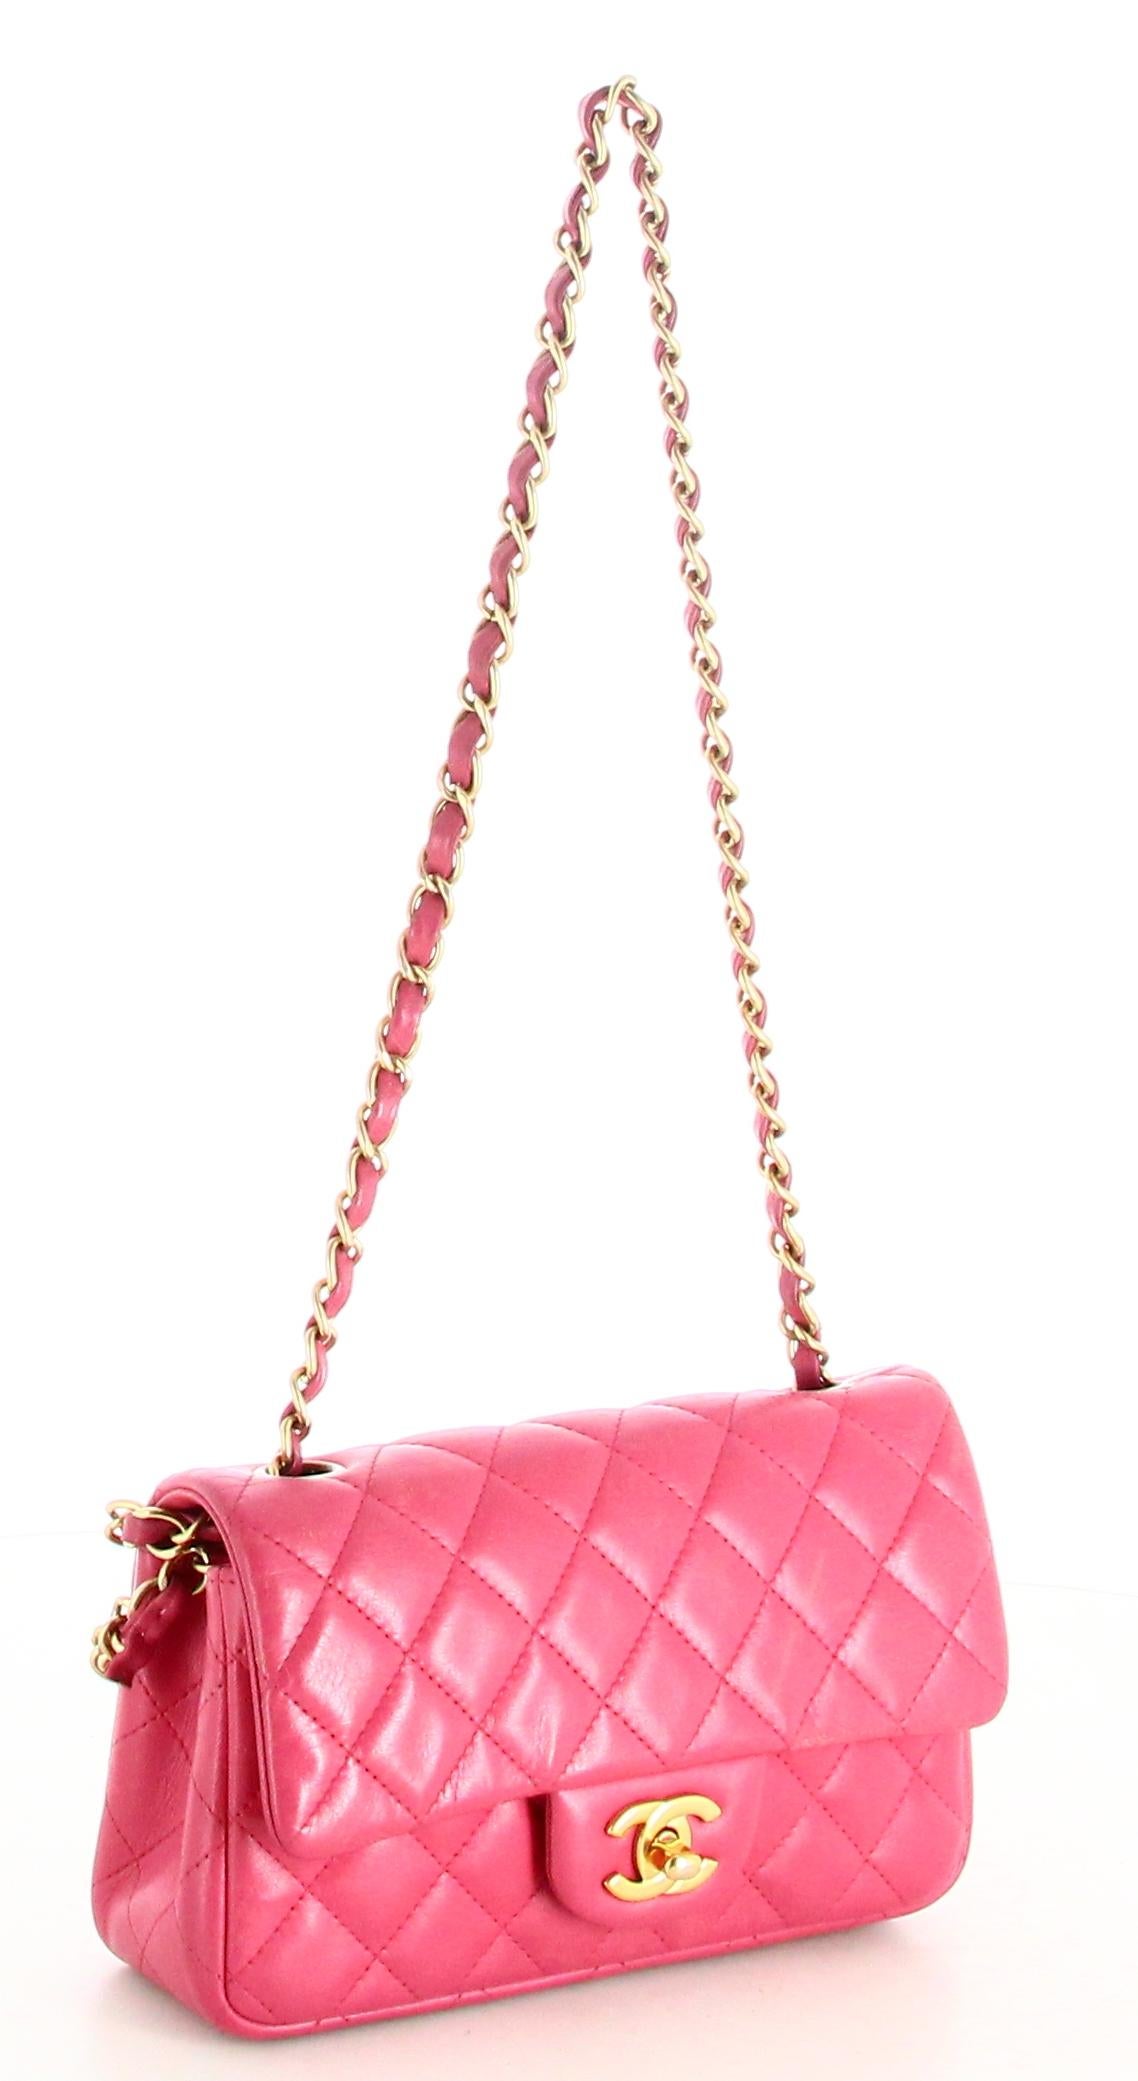 2013 Handbag Chanel mini Classic Flap Leather Lambskin Pink

- Good condition. Slight traces of wear over time. 
- Chanel Handbag 
- Pink lambskin leather
- Quilted 
- Double chain 
- Clasp : Golden 
- Inside: pink leather and inside pocket 
- Small